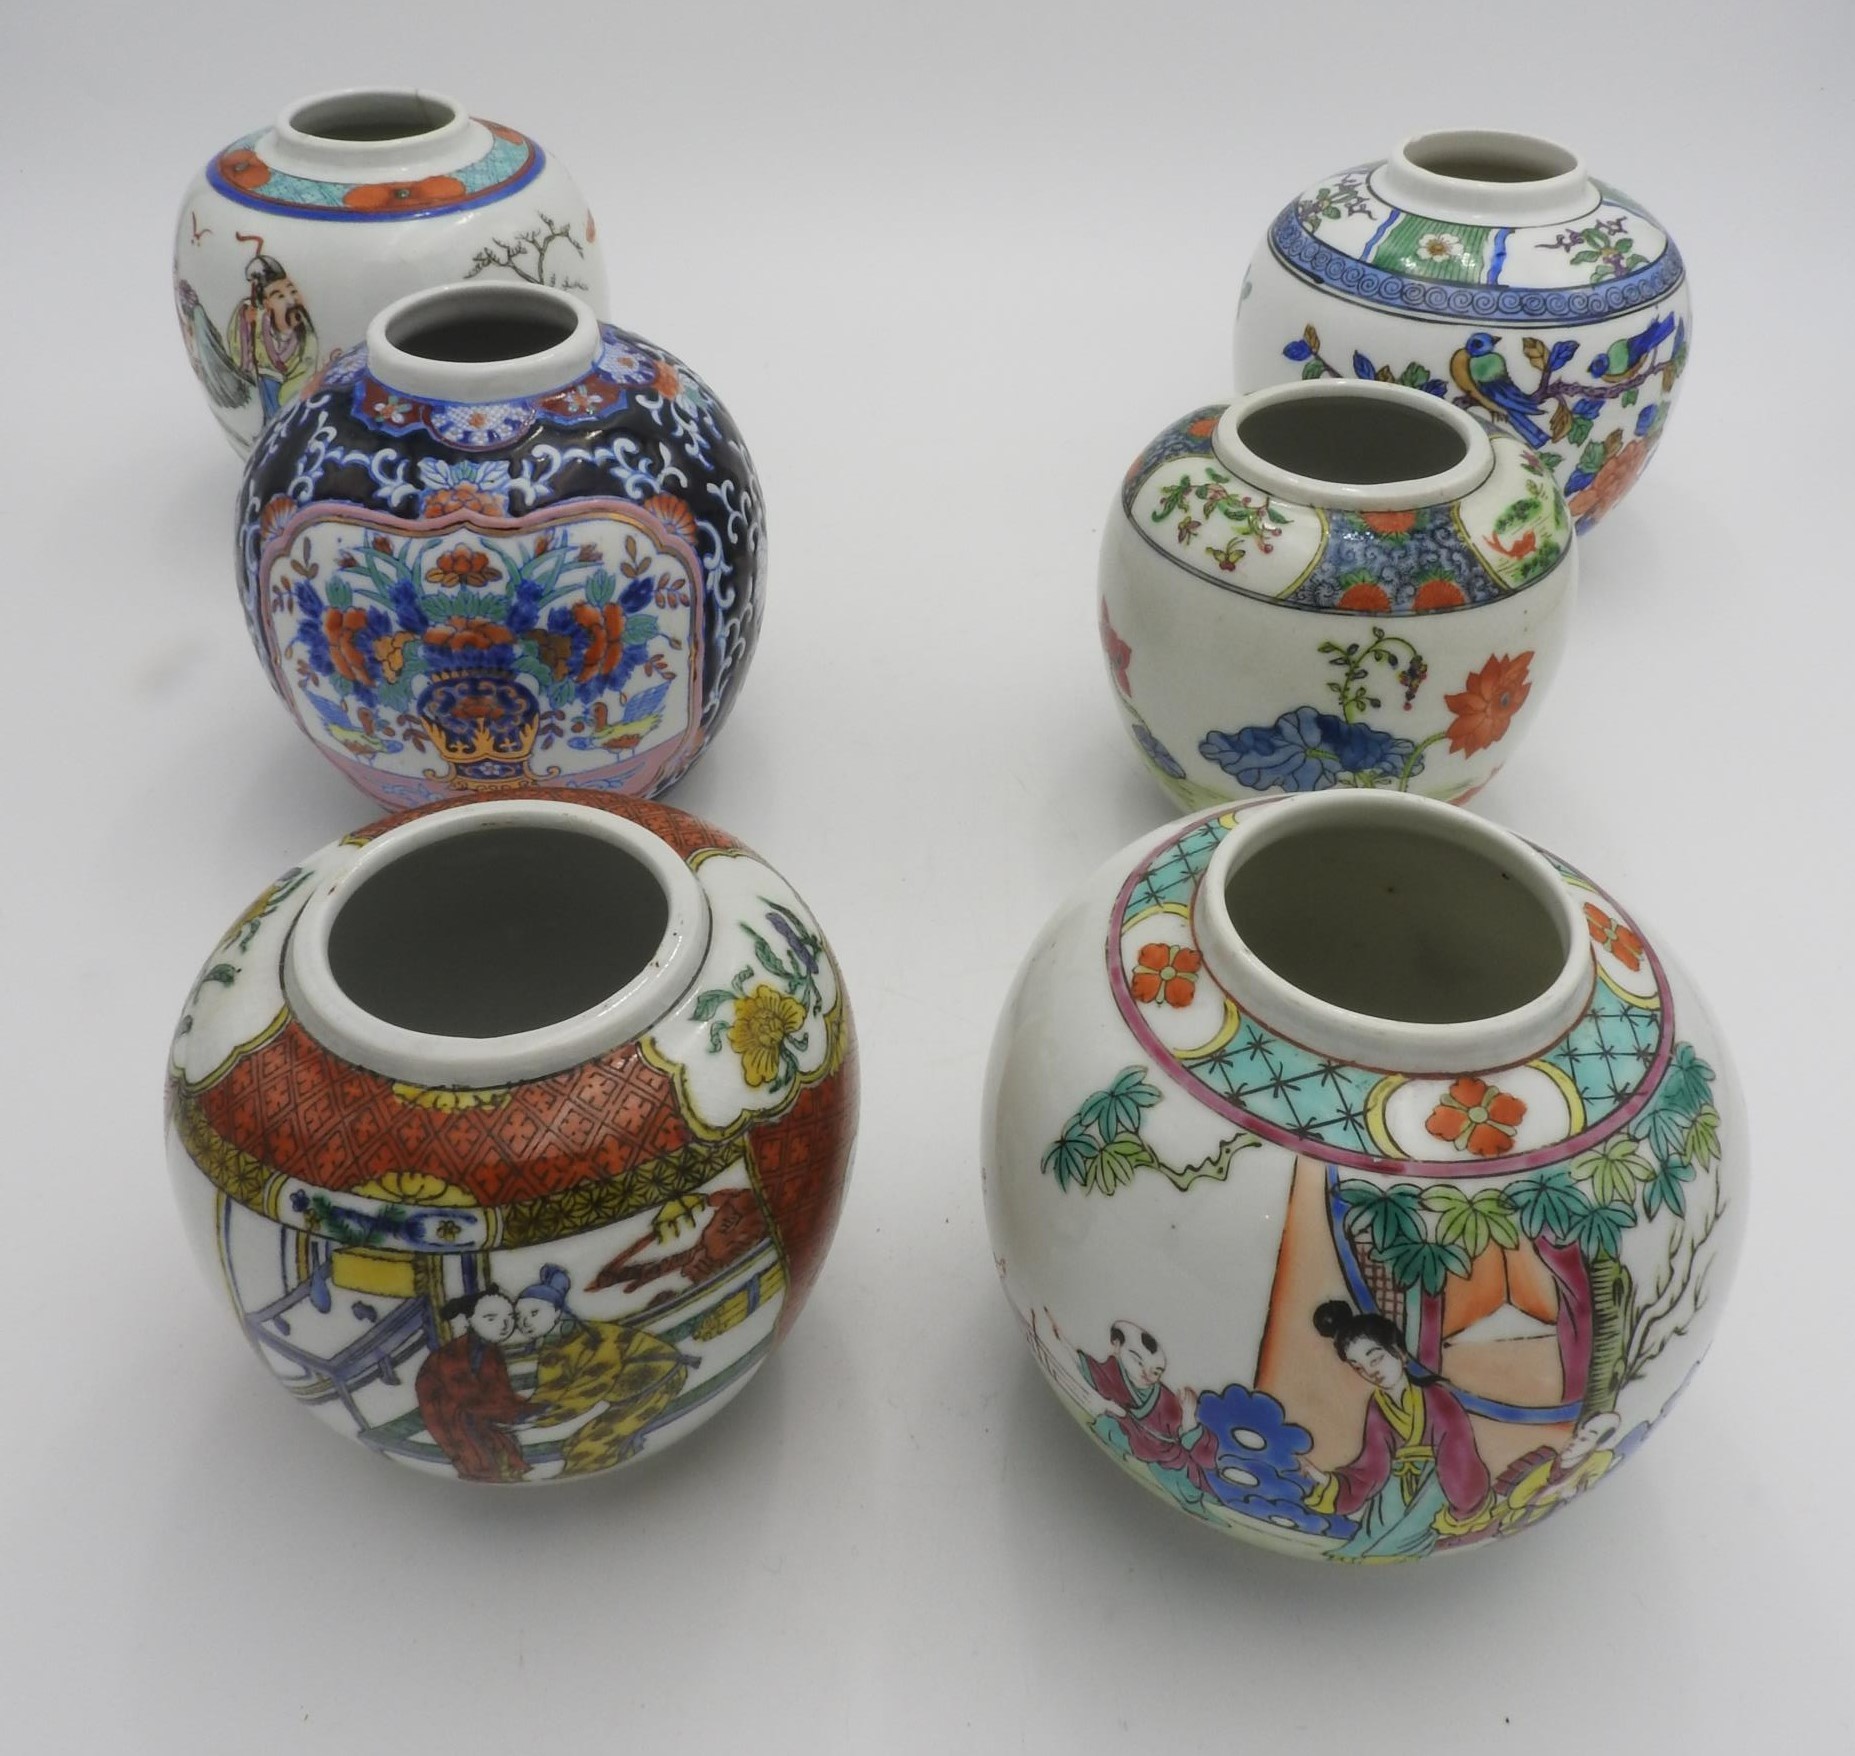 A SELECTION OF SIX 20TH CENTURY CHINESE GINGER JARS, the tallest measuring 13 cm high - Image 2 of 2